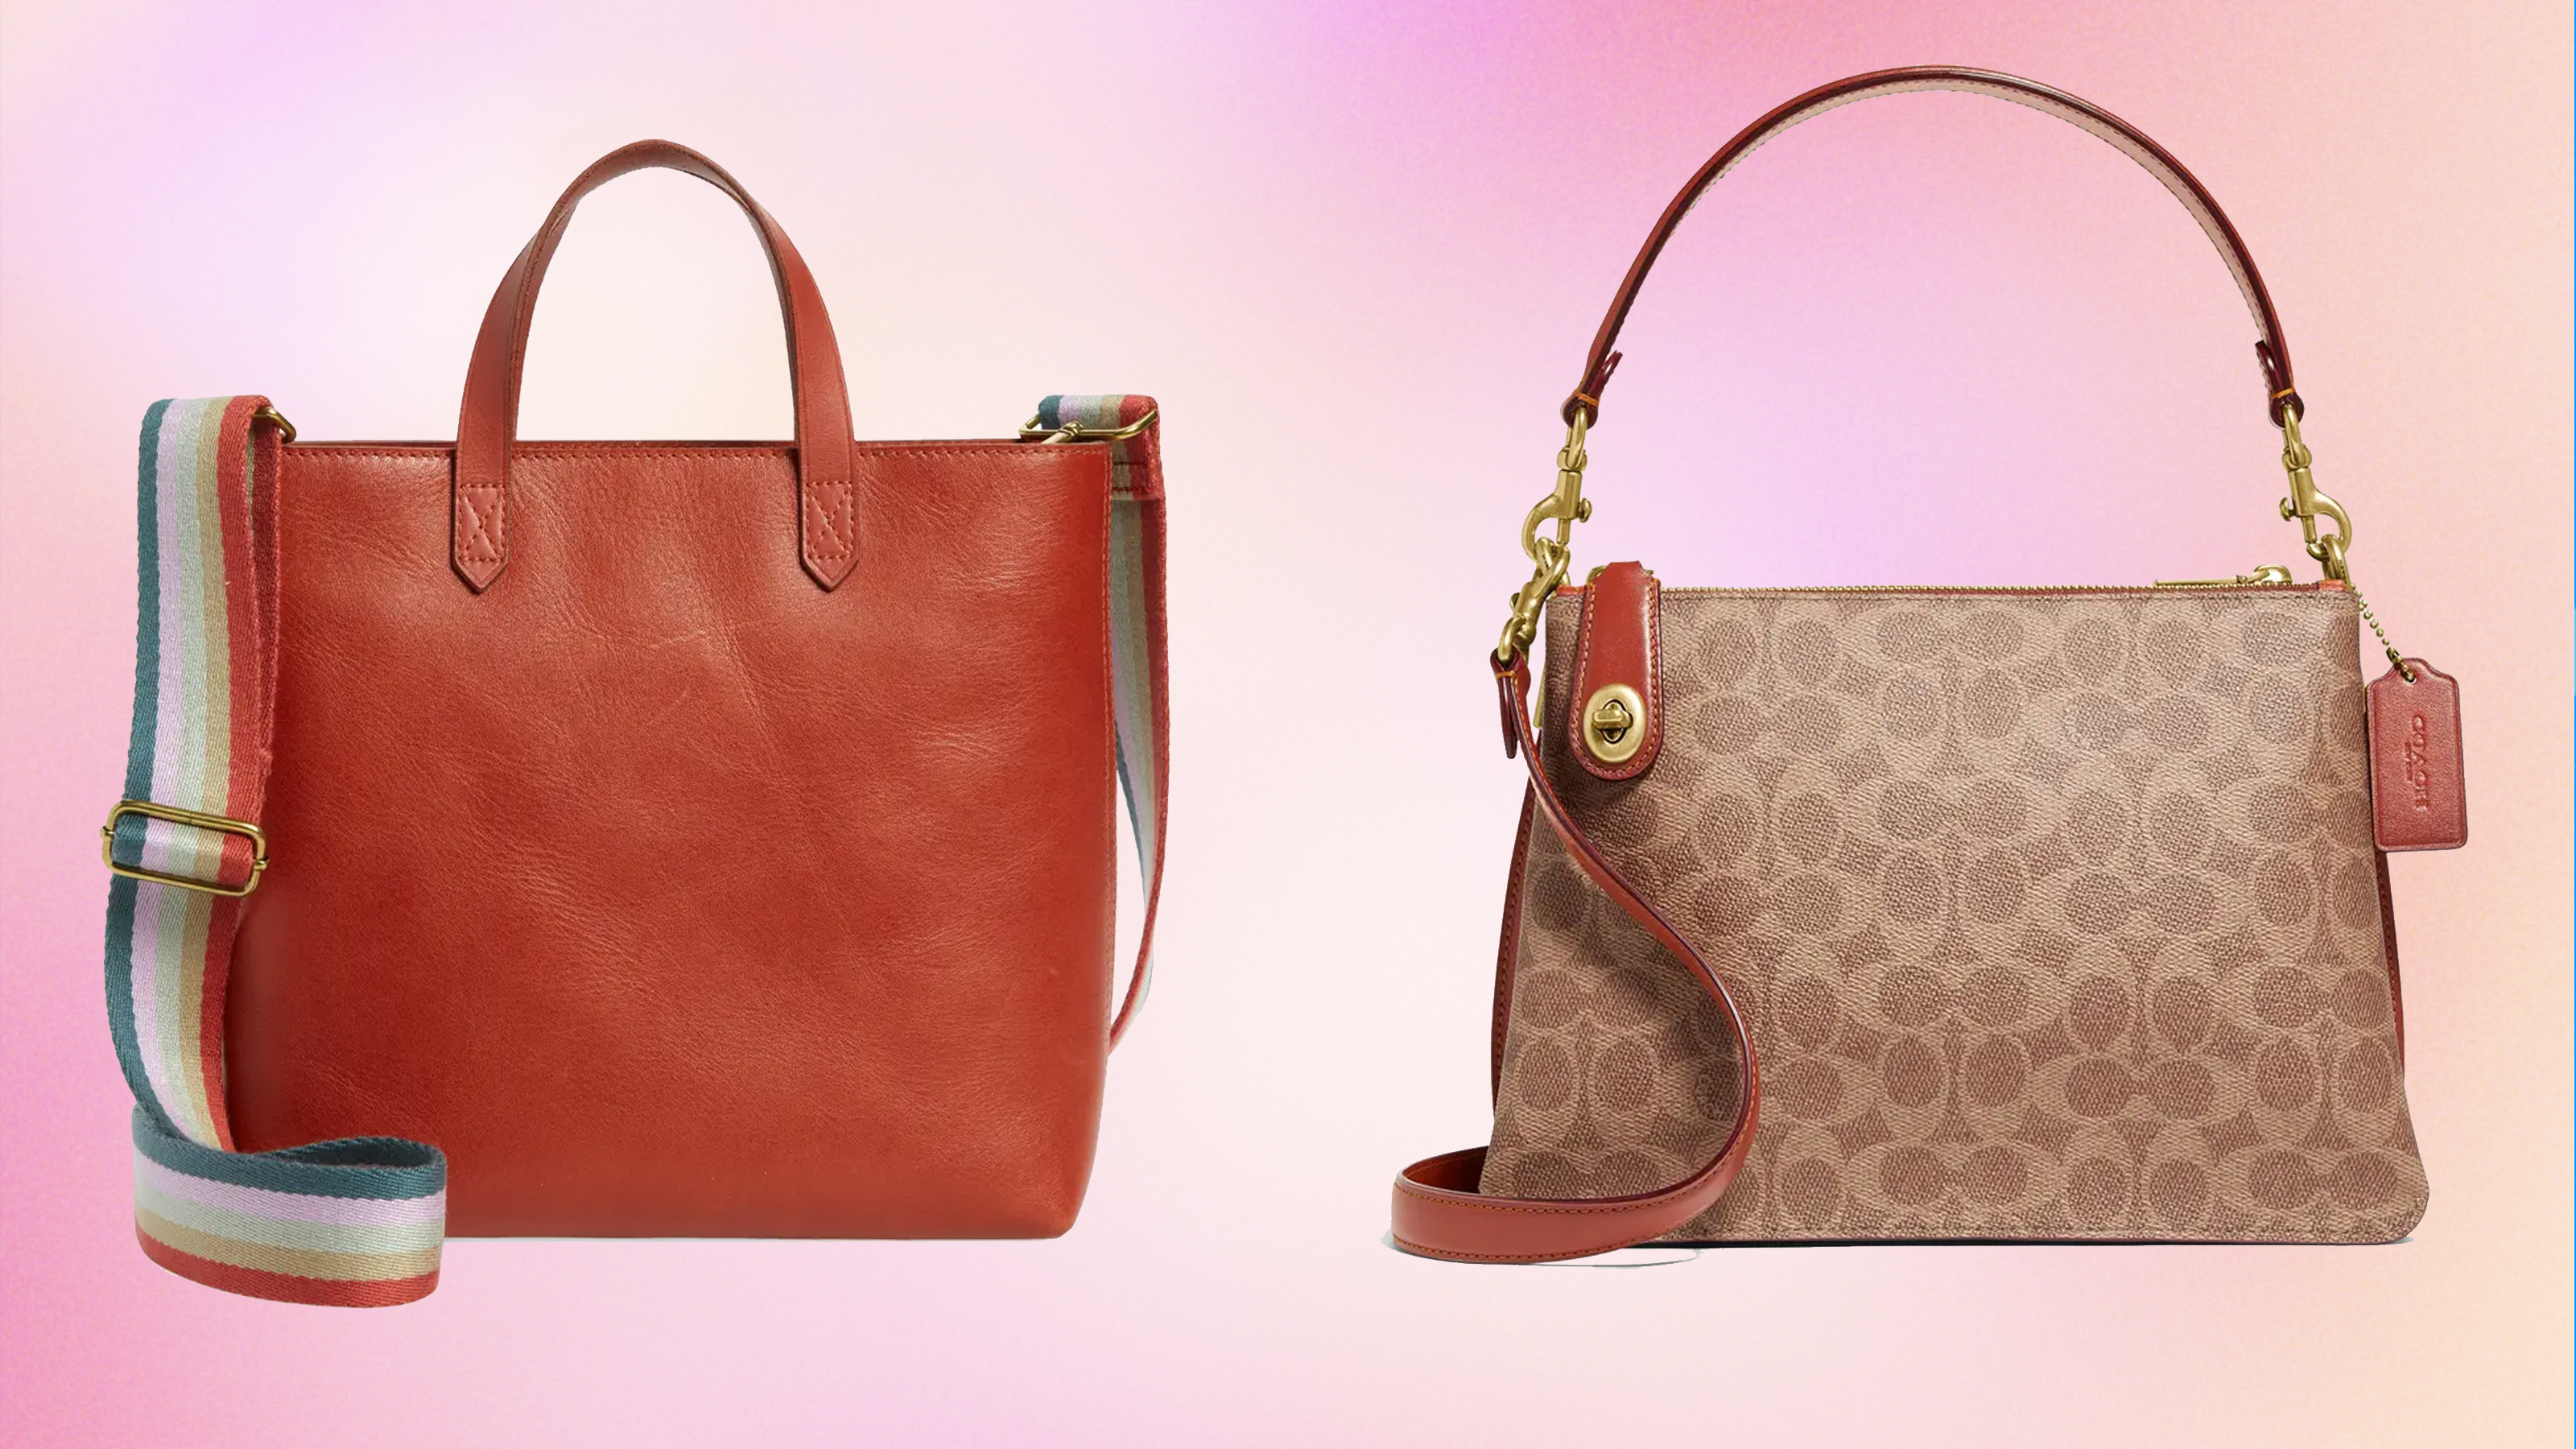 Nordstrom Anniversary Sale 2021: Best purses from Coach, Tory Burch and more